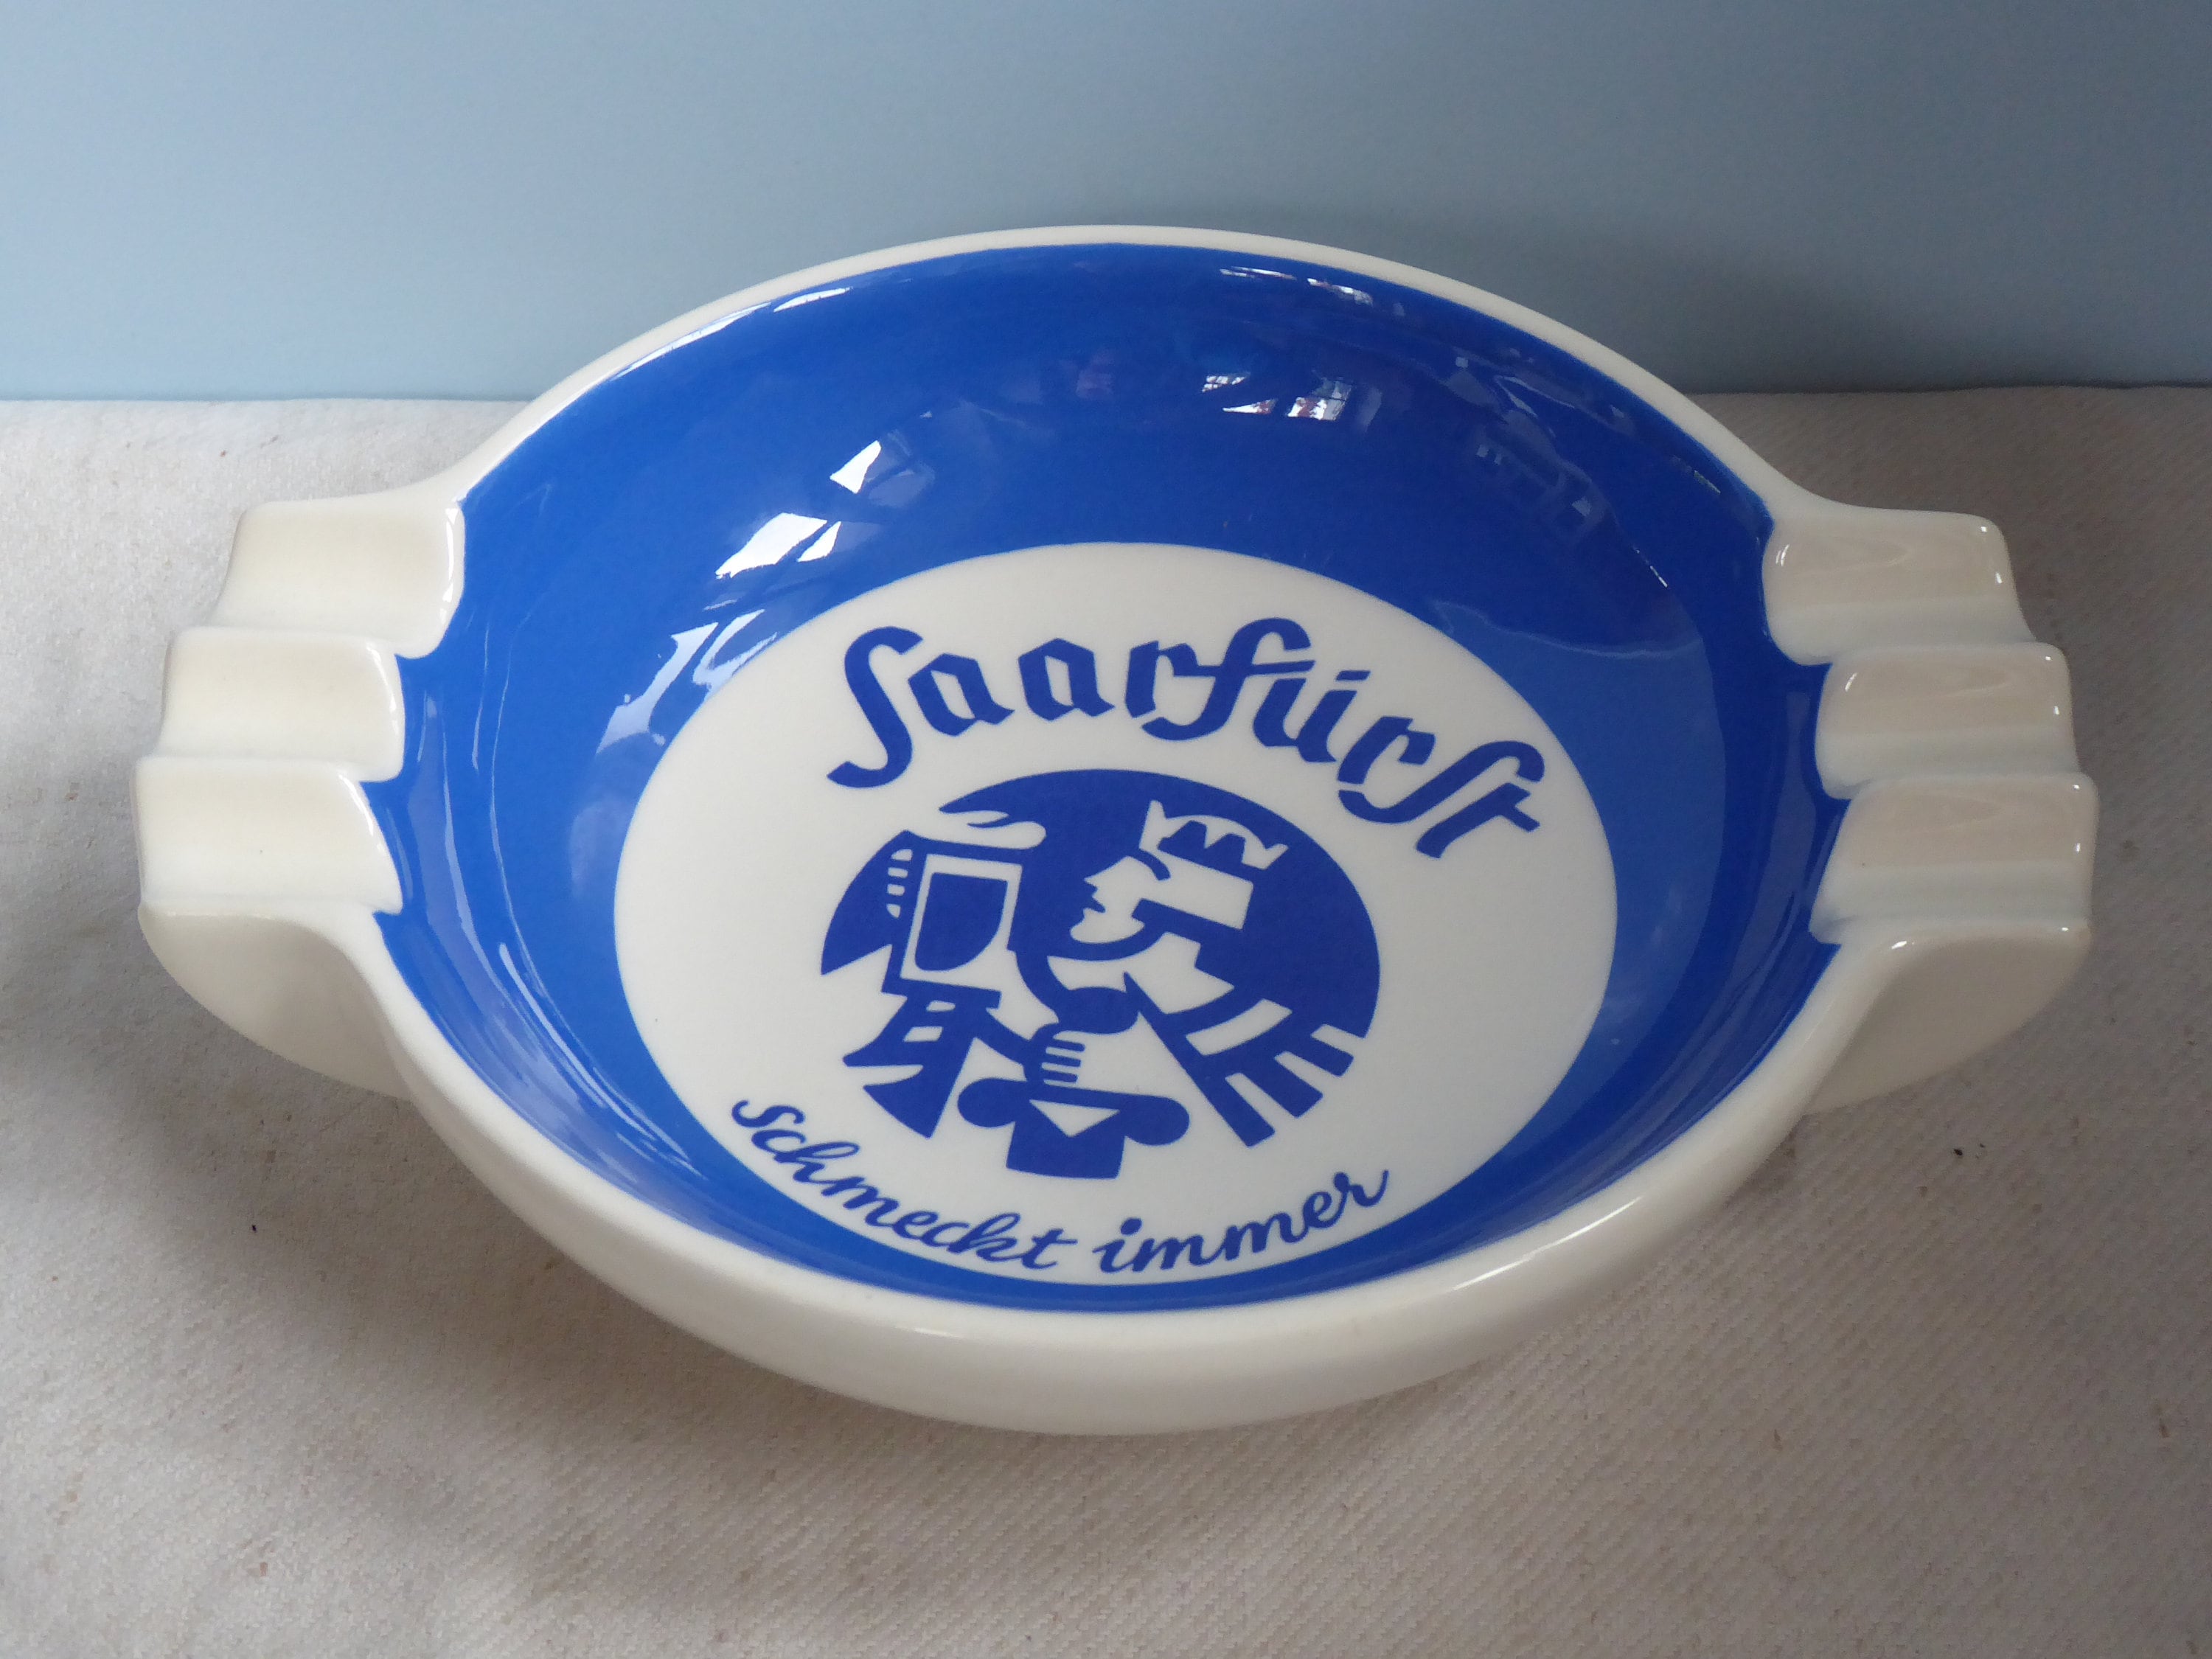 Rarely Very Old, XL Ashtray Villeroy & Boch Germany Mettlach Advertising  Saarfürst Always Tastes Antique Blue White Very Large Ashtray 